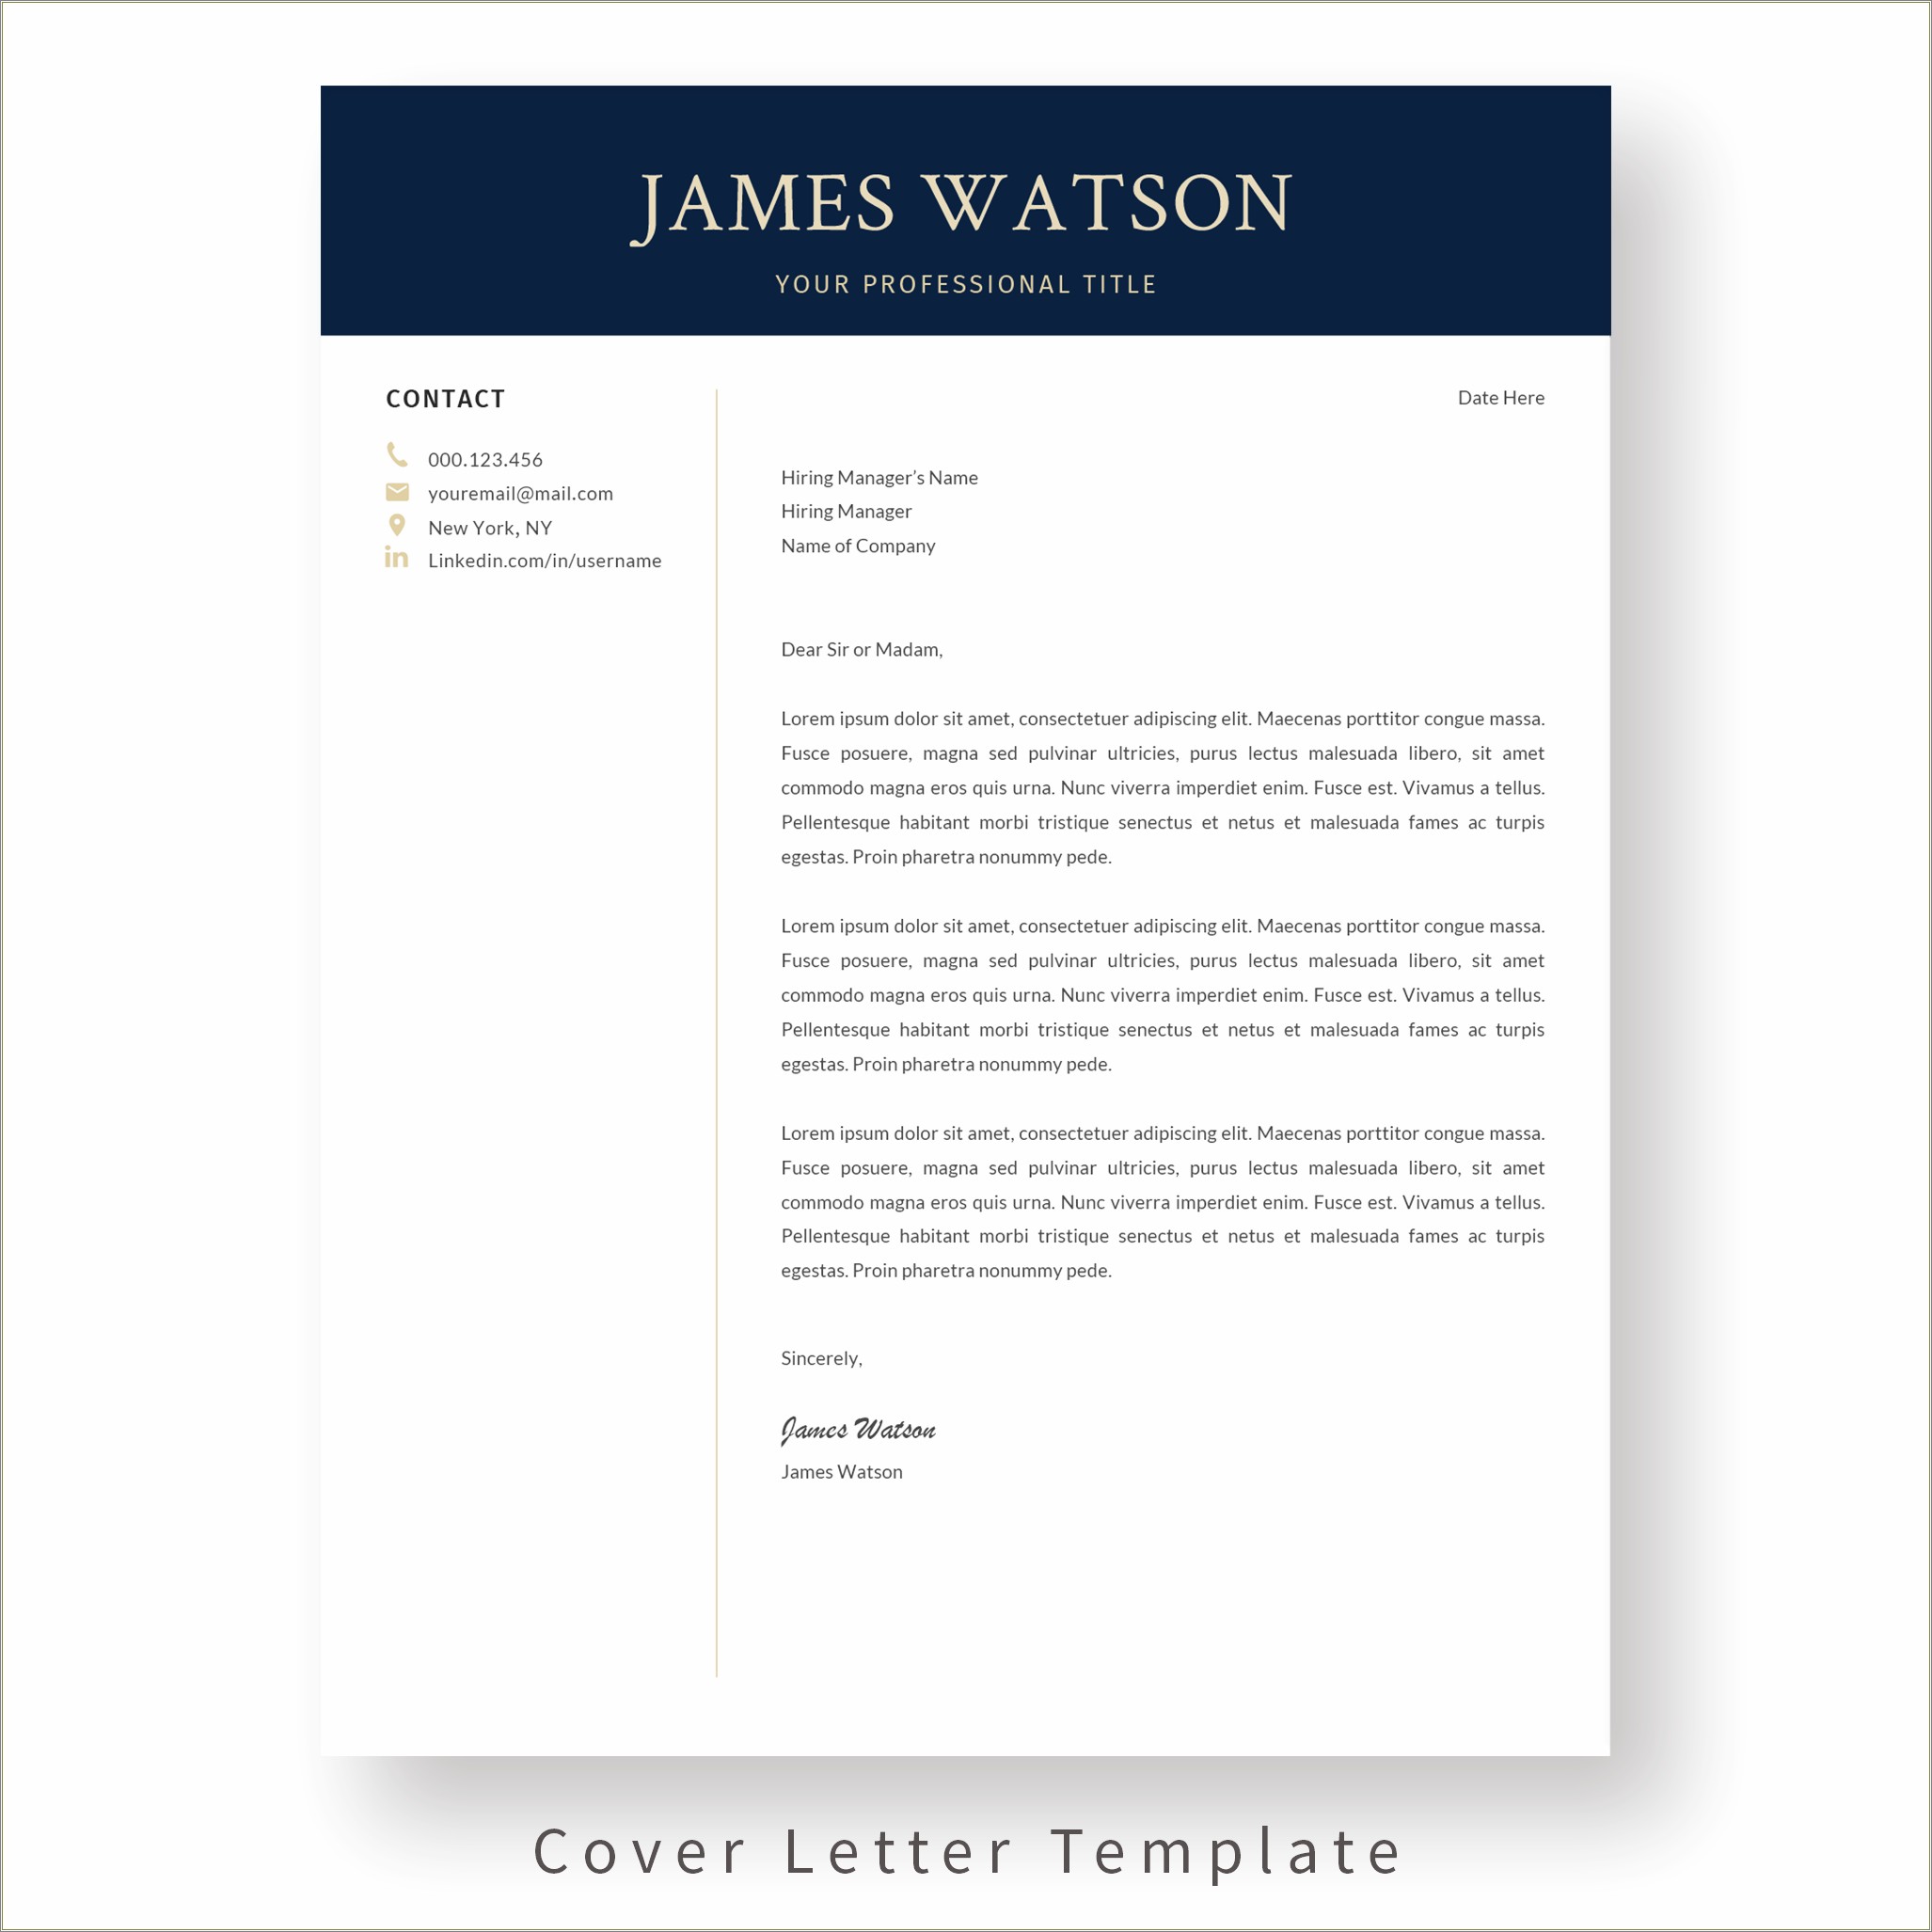 Executive Resume Cover Letter Word Template